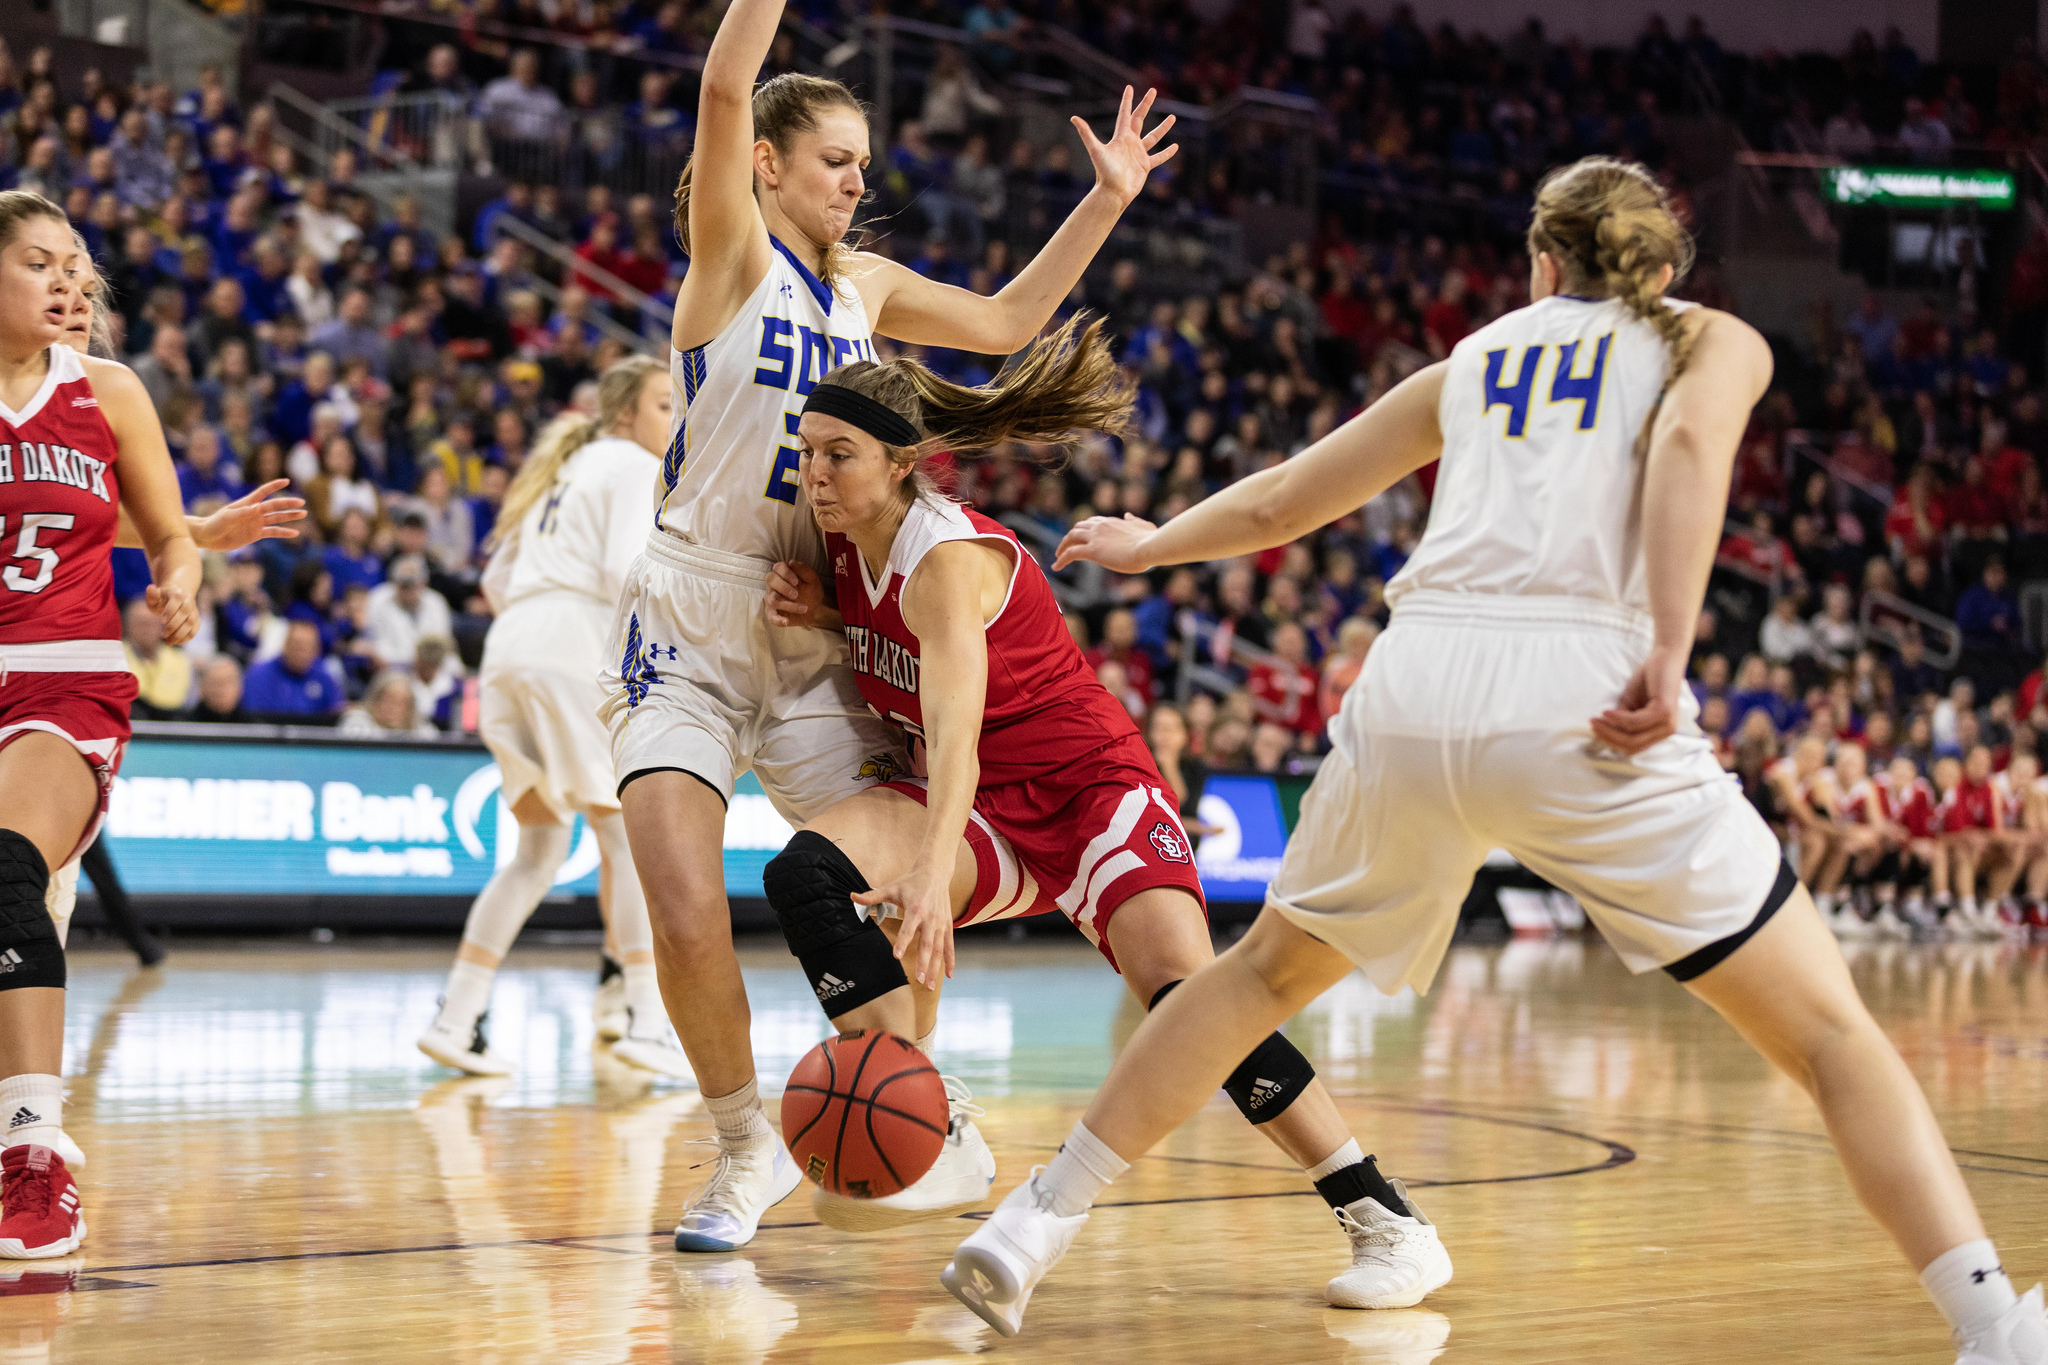 Coyotes fall to Jacks in championship, await selection committee decision